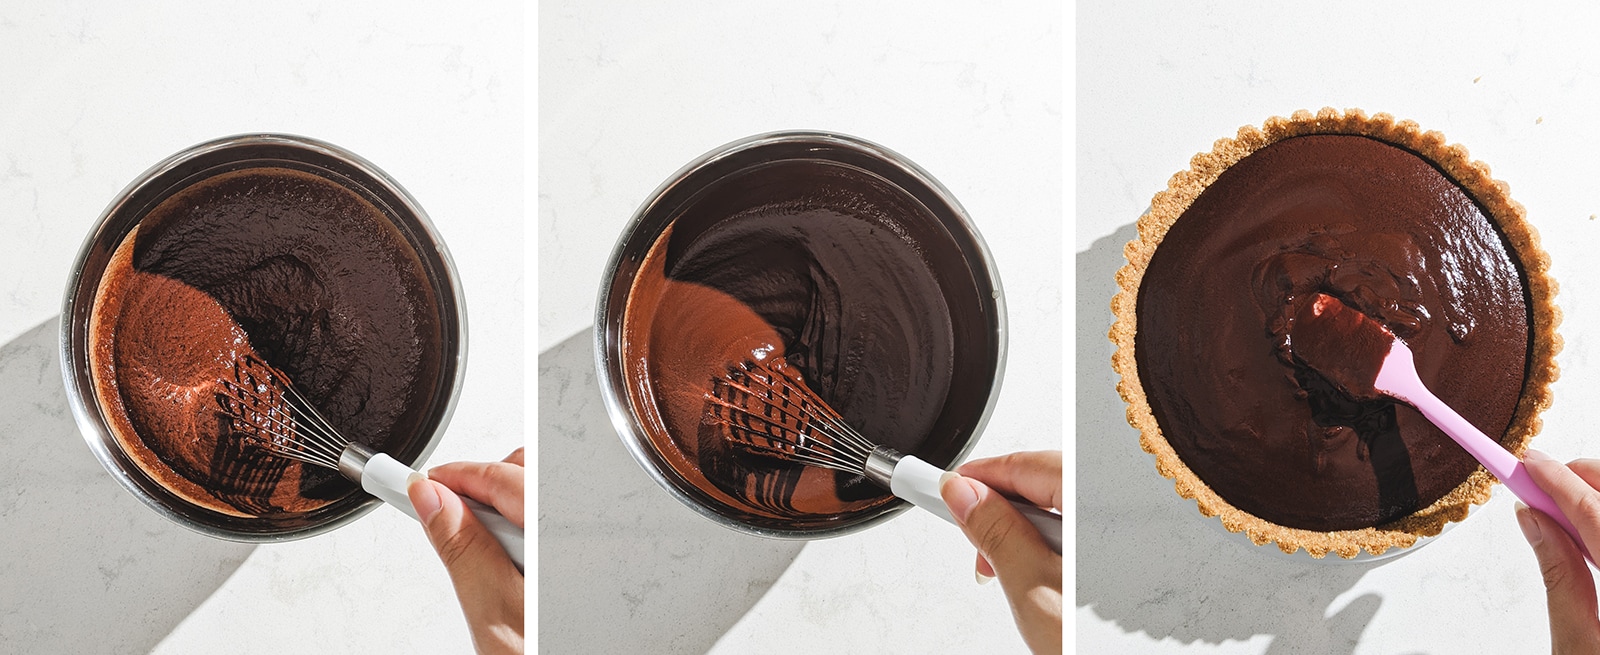 3 image collage of mixing chocolate ganache until smooth and pouring it into tart shell.